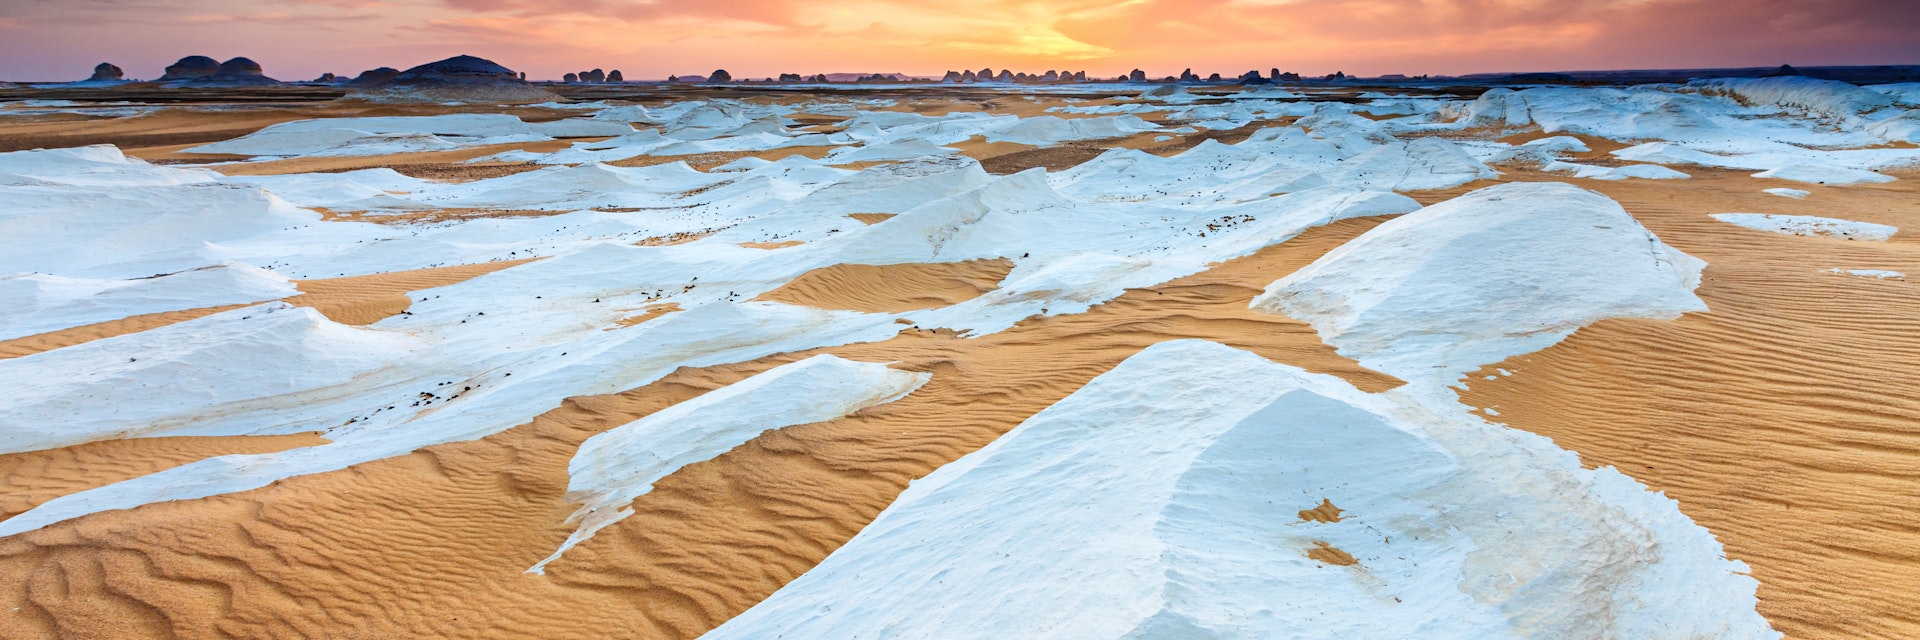 "Sunset over  The White Desert, part of The Western Sahara Desert in Egypt. The White Desert of Egypt is located 45 km (28 mi) north of the town of Farafra. The desert has a white, cream color and has massive chalk rock formations that have been created as a result of occasional sandstorm in the area."
175454221
"Horizon Over Land, Africa, Arid Climate, Awe, Beauty In Nature, Chalk, Cloud, Cloudscape, Desert, Dramatic Sky, Dry, Dusk, Egypt, Environment, Extreme Terrain, Geological Feature", Heat, Horizon, Idyllic, Land, Land Feature, Landscape, Landscapes, Large, Light, Majestic, Moody Sky, National Park, Natural Land State, Natural Phenomenon, Nature, Nature, Nature Reserve, Nobody, Non-Urban Scene, Parkland, Remote, Rippled, Rock, Romantic Sky, Sahara Desert, Sand, Sand Dune, Saturated Color, Scenics, Shade, Shadow, Sky, Solitude, Sun, Sunbeam, Sunlight, Sunset, Twilight, Vibrant Color, Western Sahara Desert, White Desert